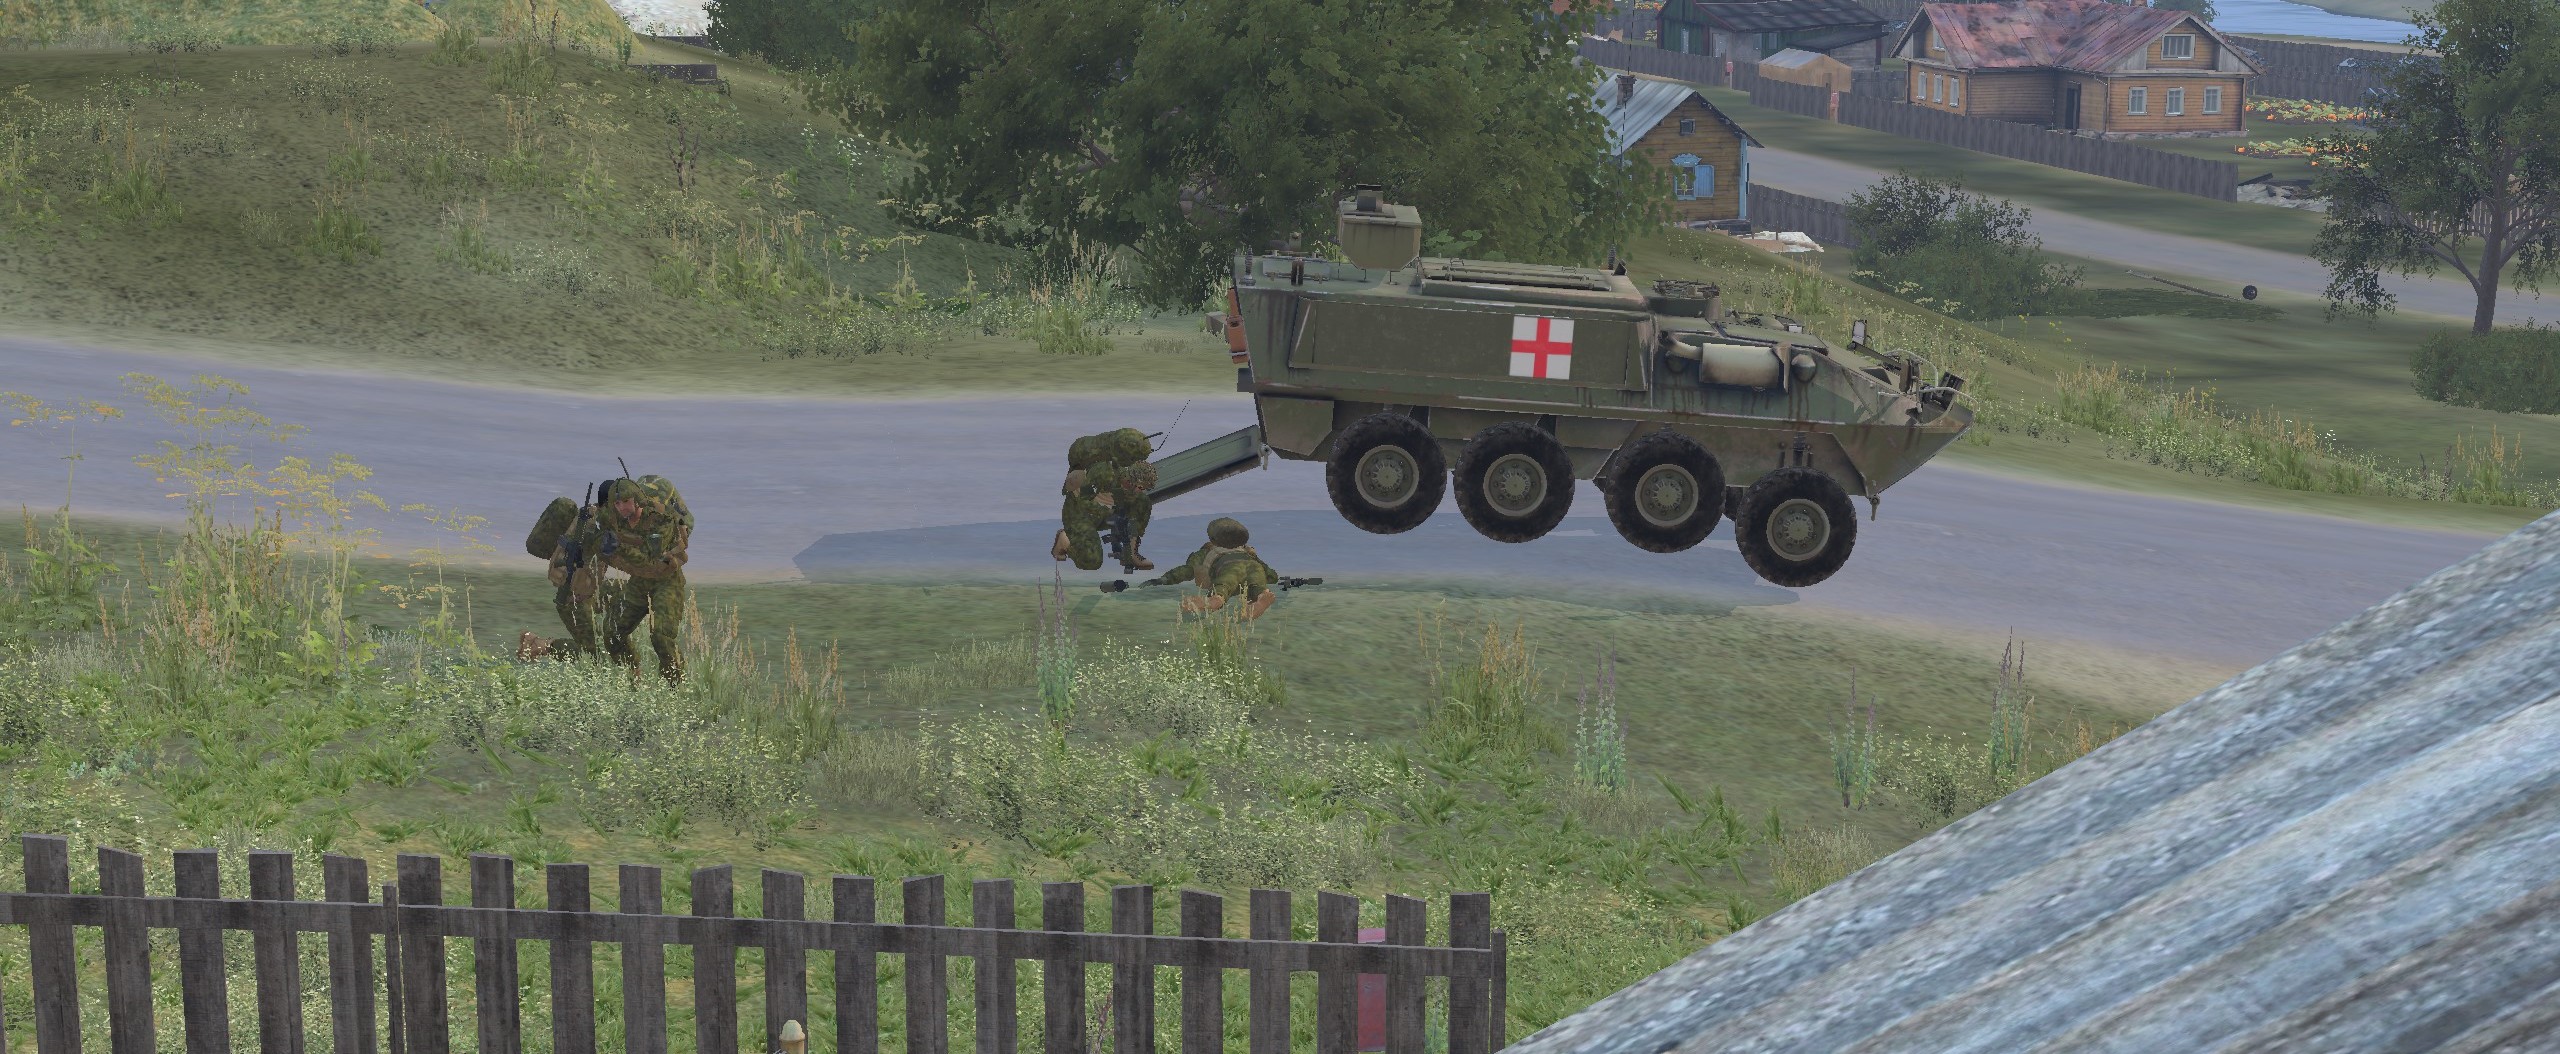 83 personnel tending to a wounded soldier from 3 PL (VIRTUAL THIS IS NOT REAL LIFE)